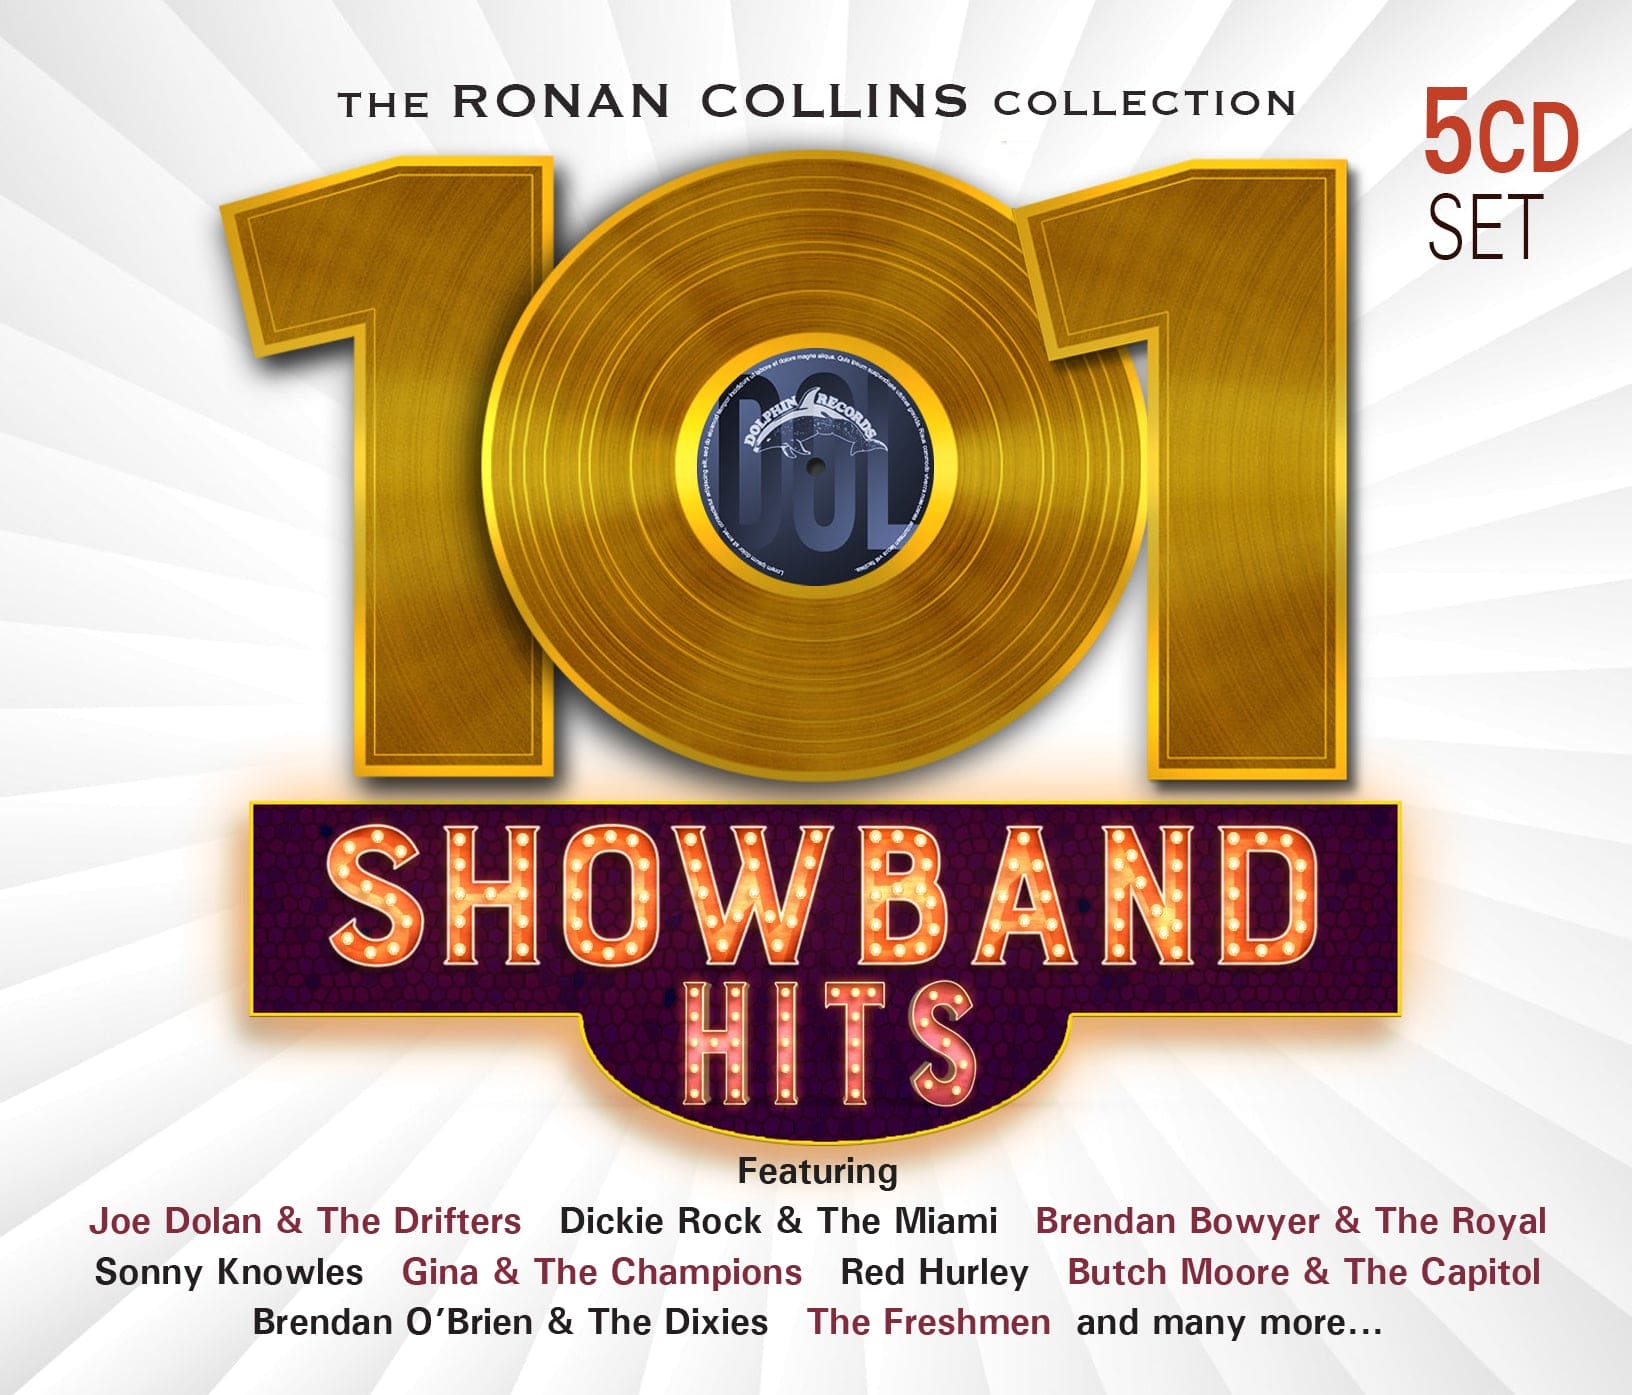 101 Showband Hits - The Ronan Collins Collection - Various Artists [5CD]